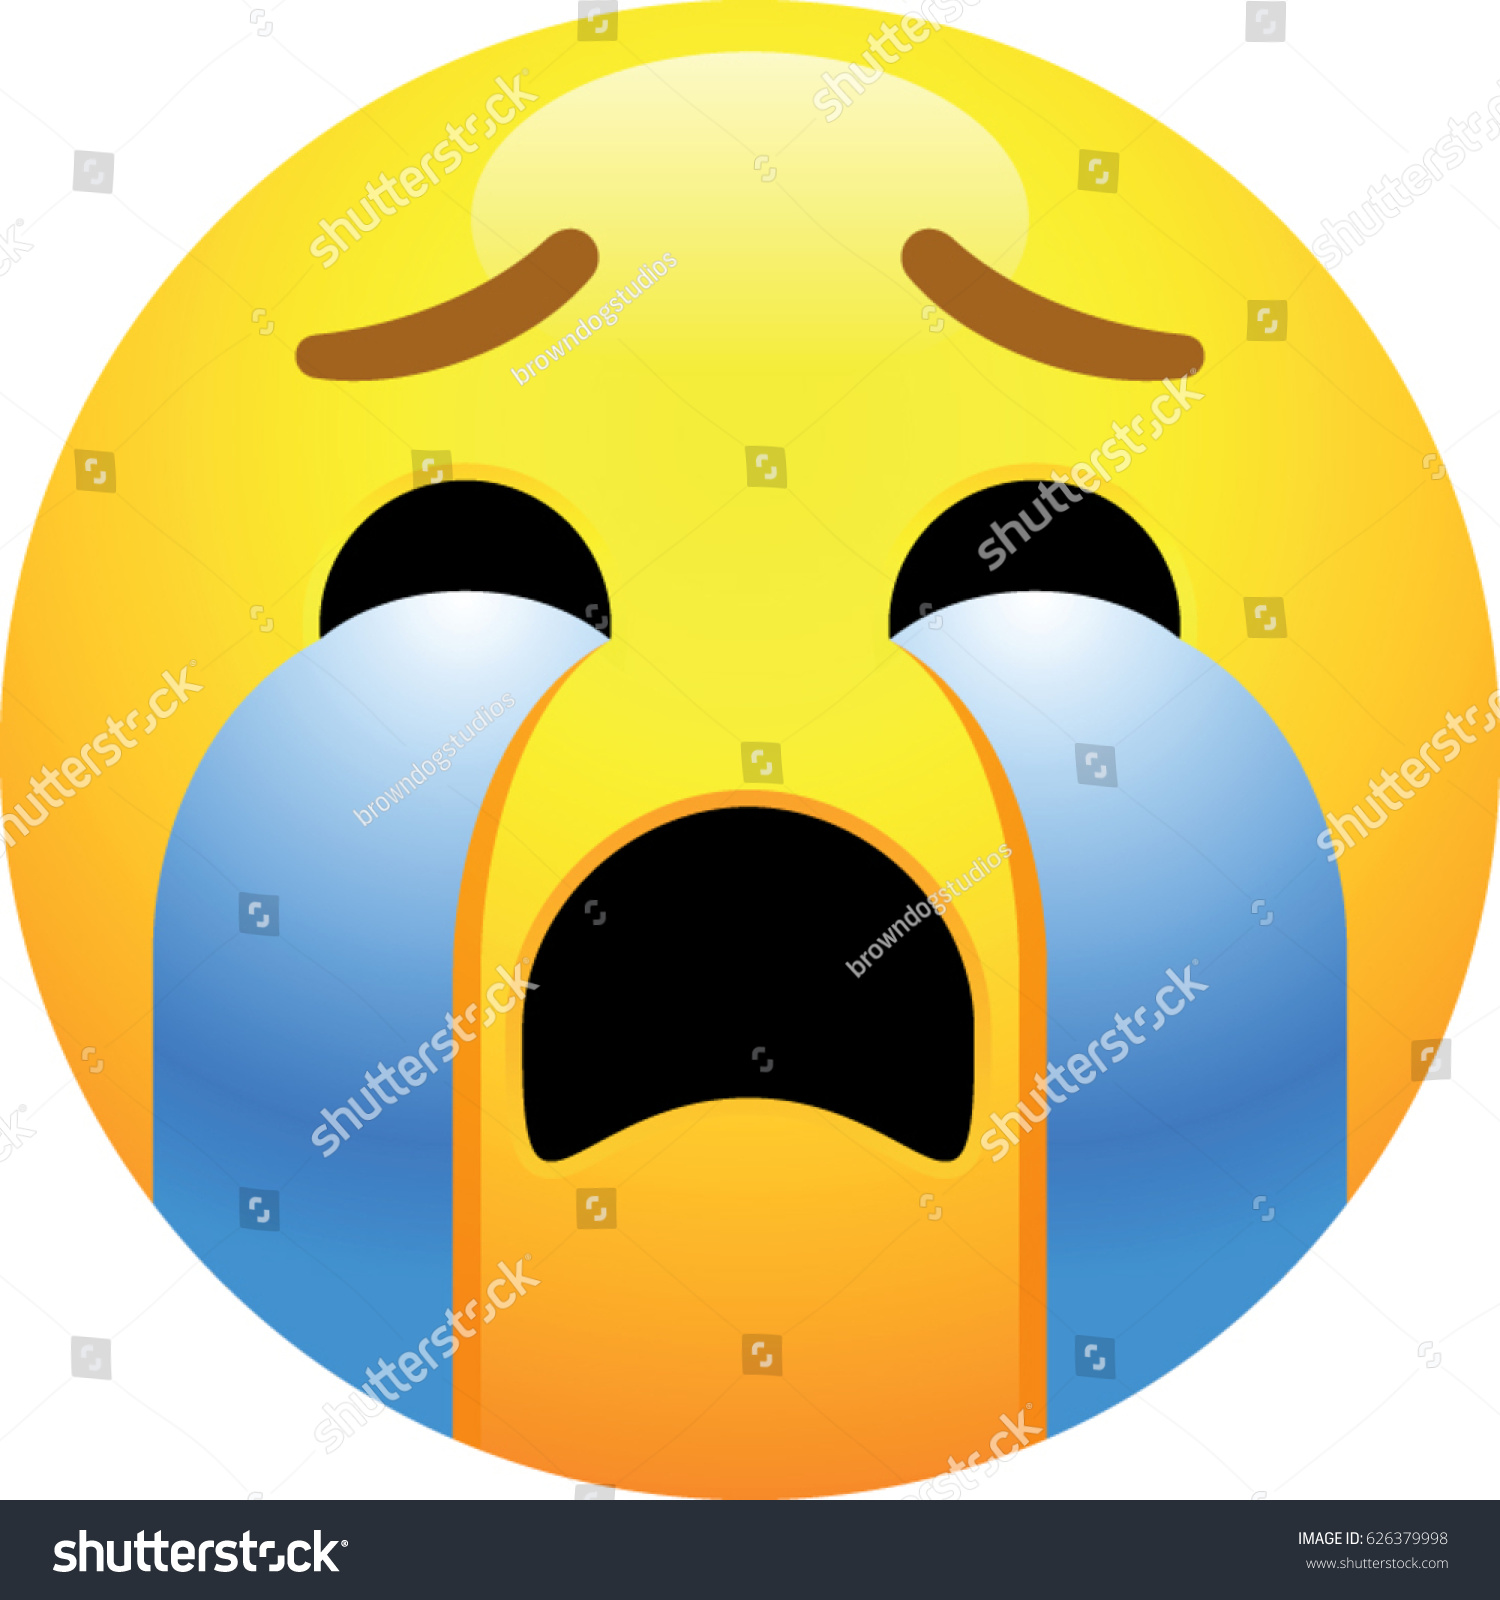 Crying Loudly Face Emoji Stock Vector (Royalty Free) 626379998 ...